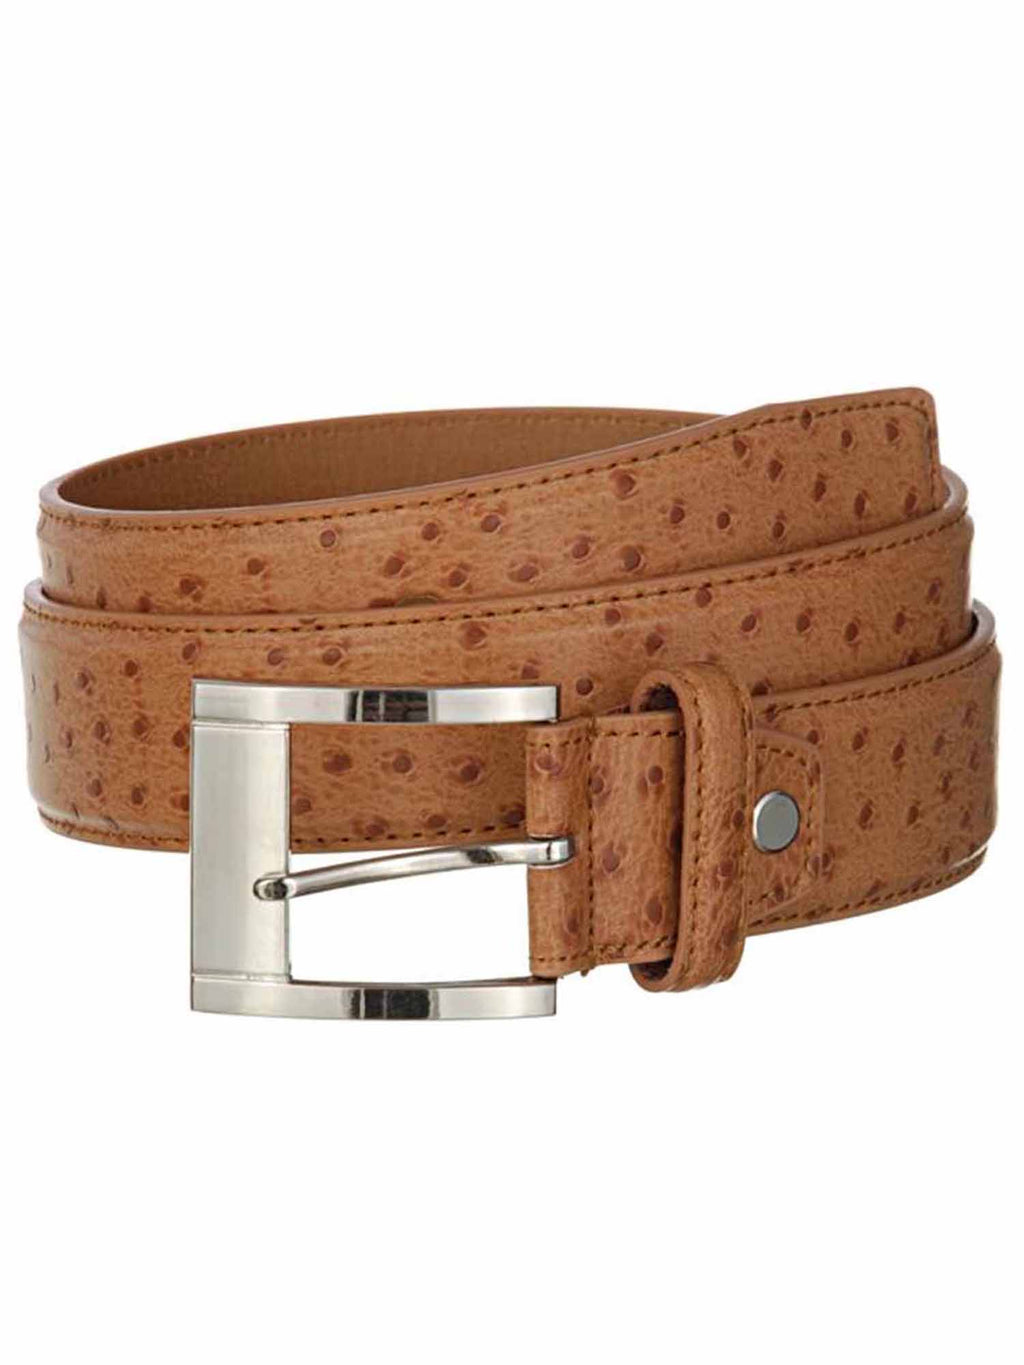 Men's Ostrich Leather Belt With Chrome Buckle